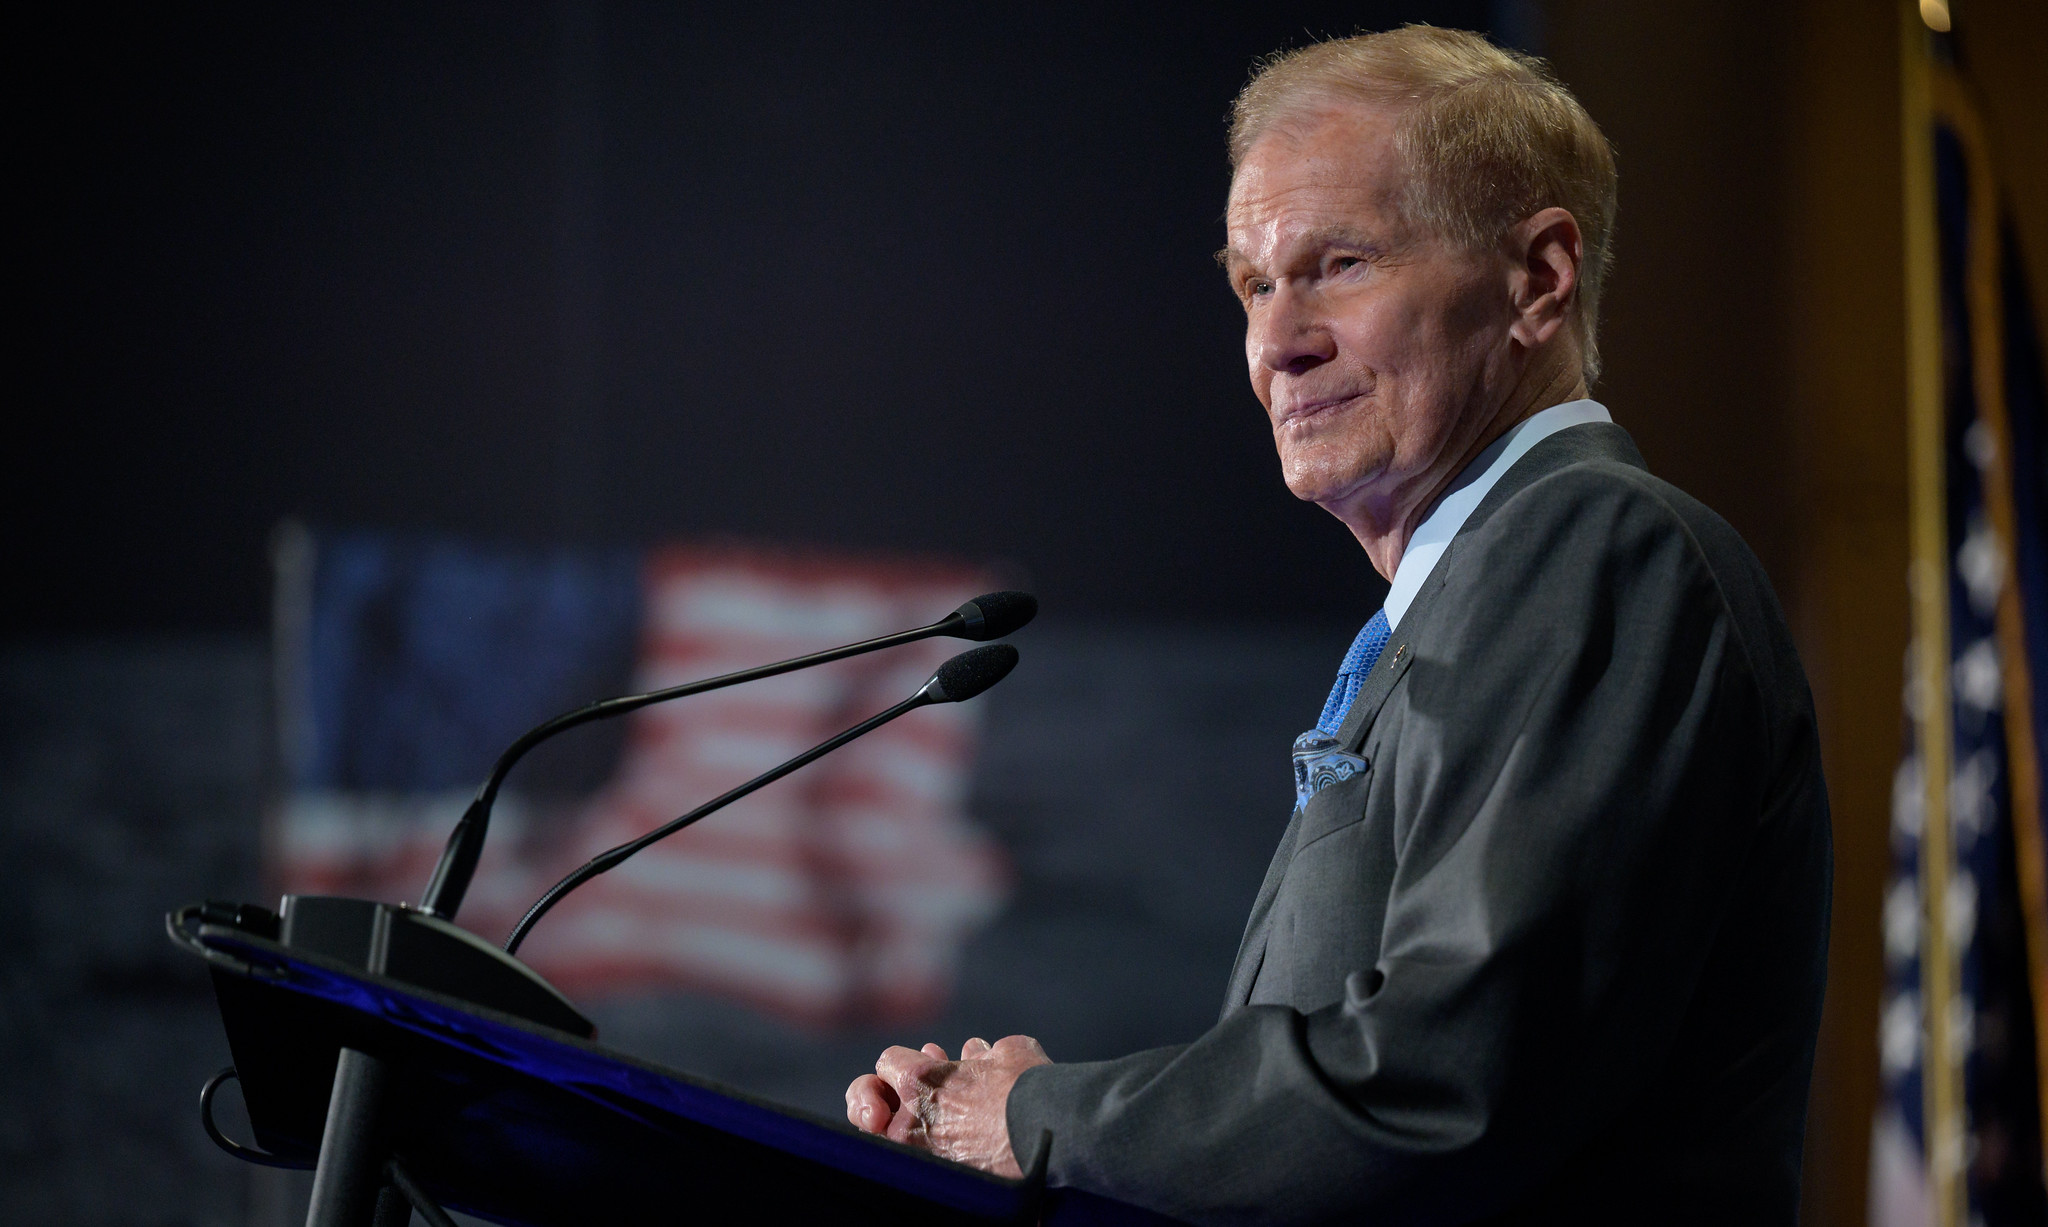 NASA Administrator Bill Nelson talks to the agency’s workforce during his first State of NASA event Wednesday, June 2, 2021, at NASA Headquarters in Washington.